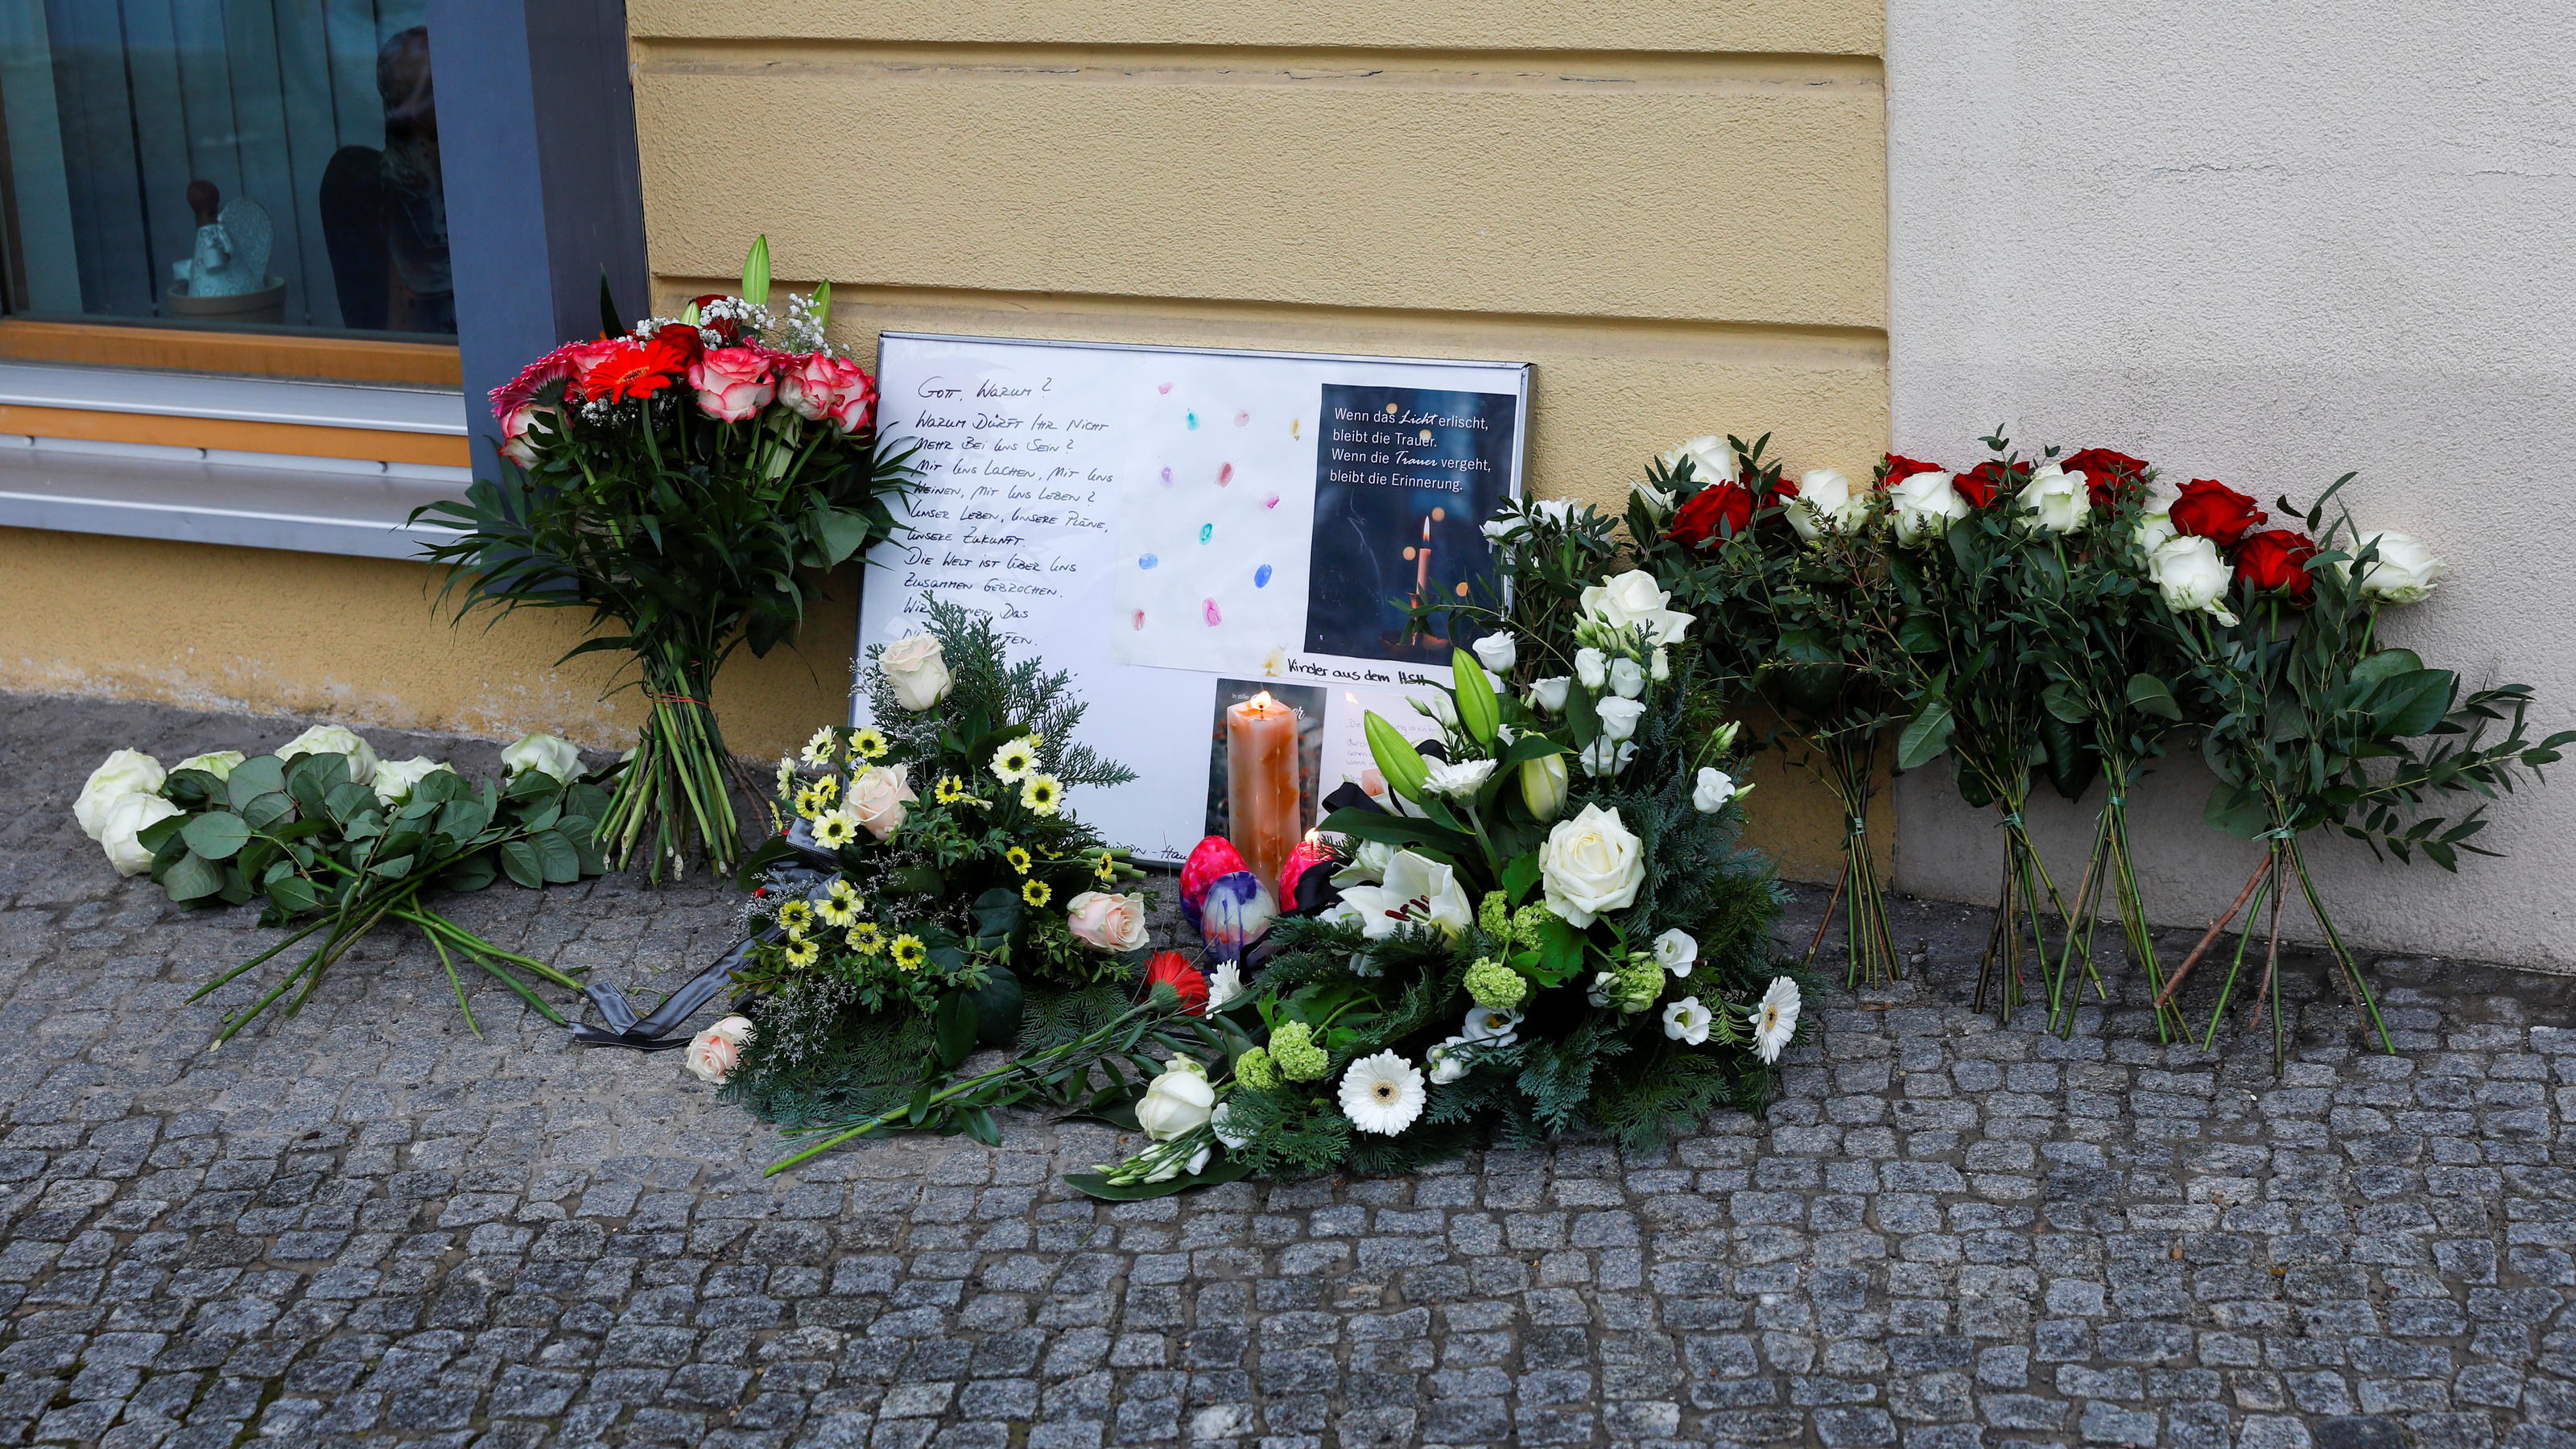 Messages and flowers are seen outside the Oberlin Clinic, following the arrest of a 51-year-old woman, after four people were found dead and another seriously injured at a hospital, in Potsdam, Germany, April 29, 2021. REUTERS/Michele Tantussi